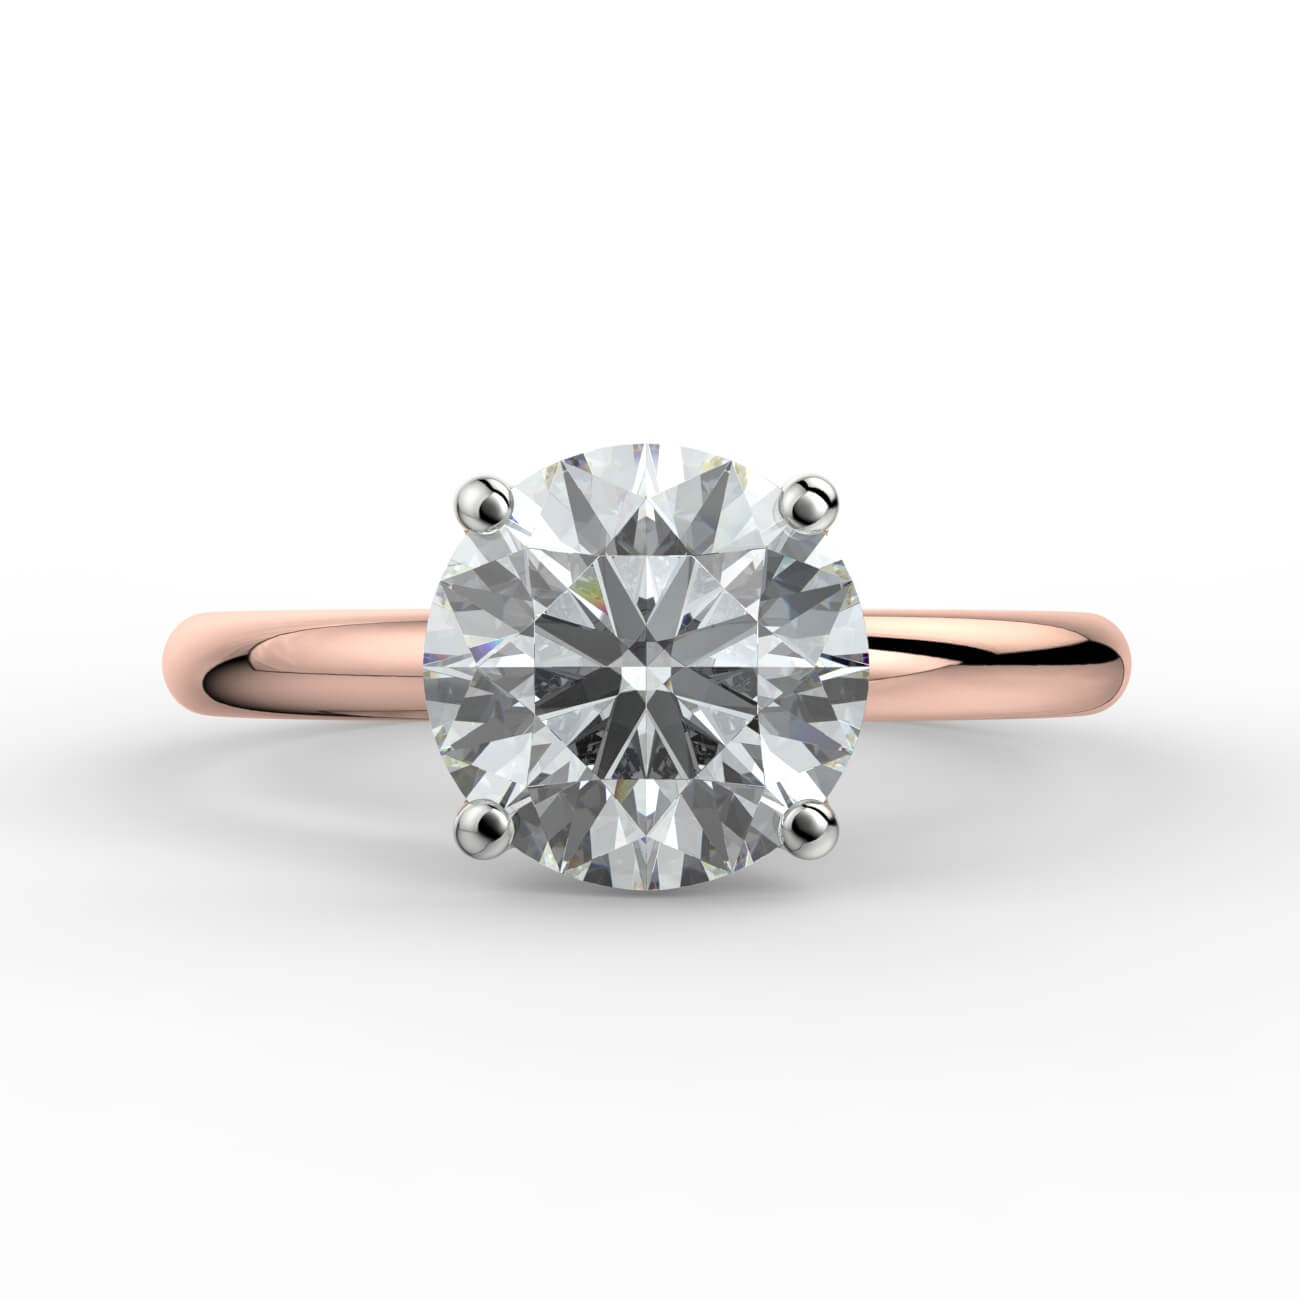 Solitaire diamond engagement ring in rose and white gold – Australian Diamond Network